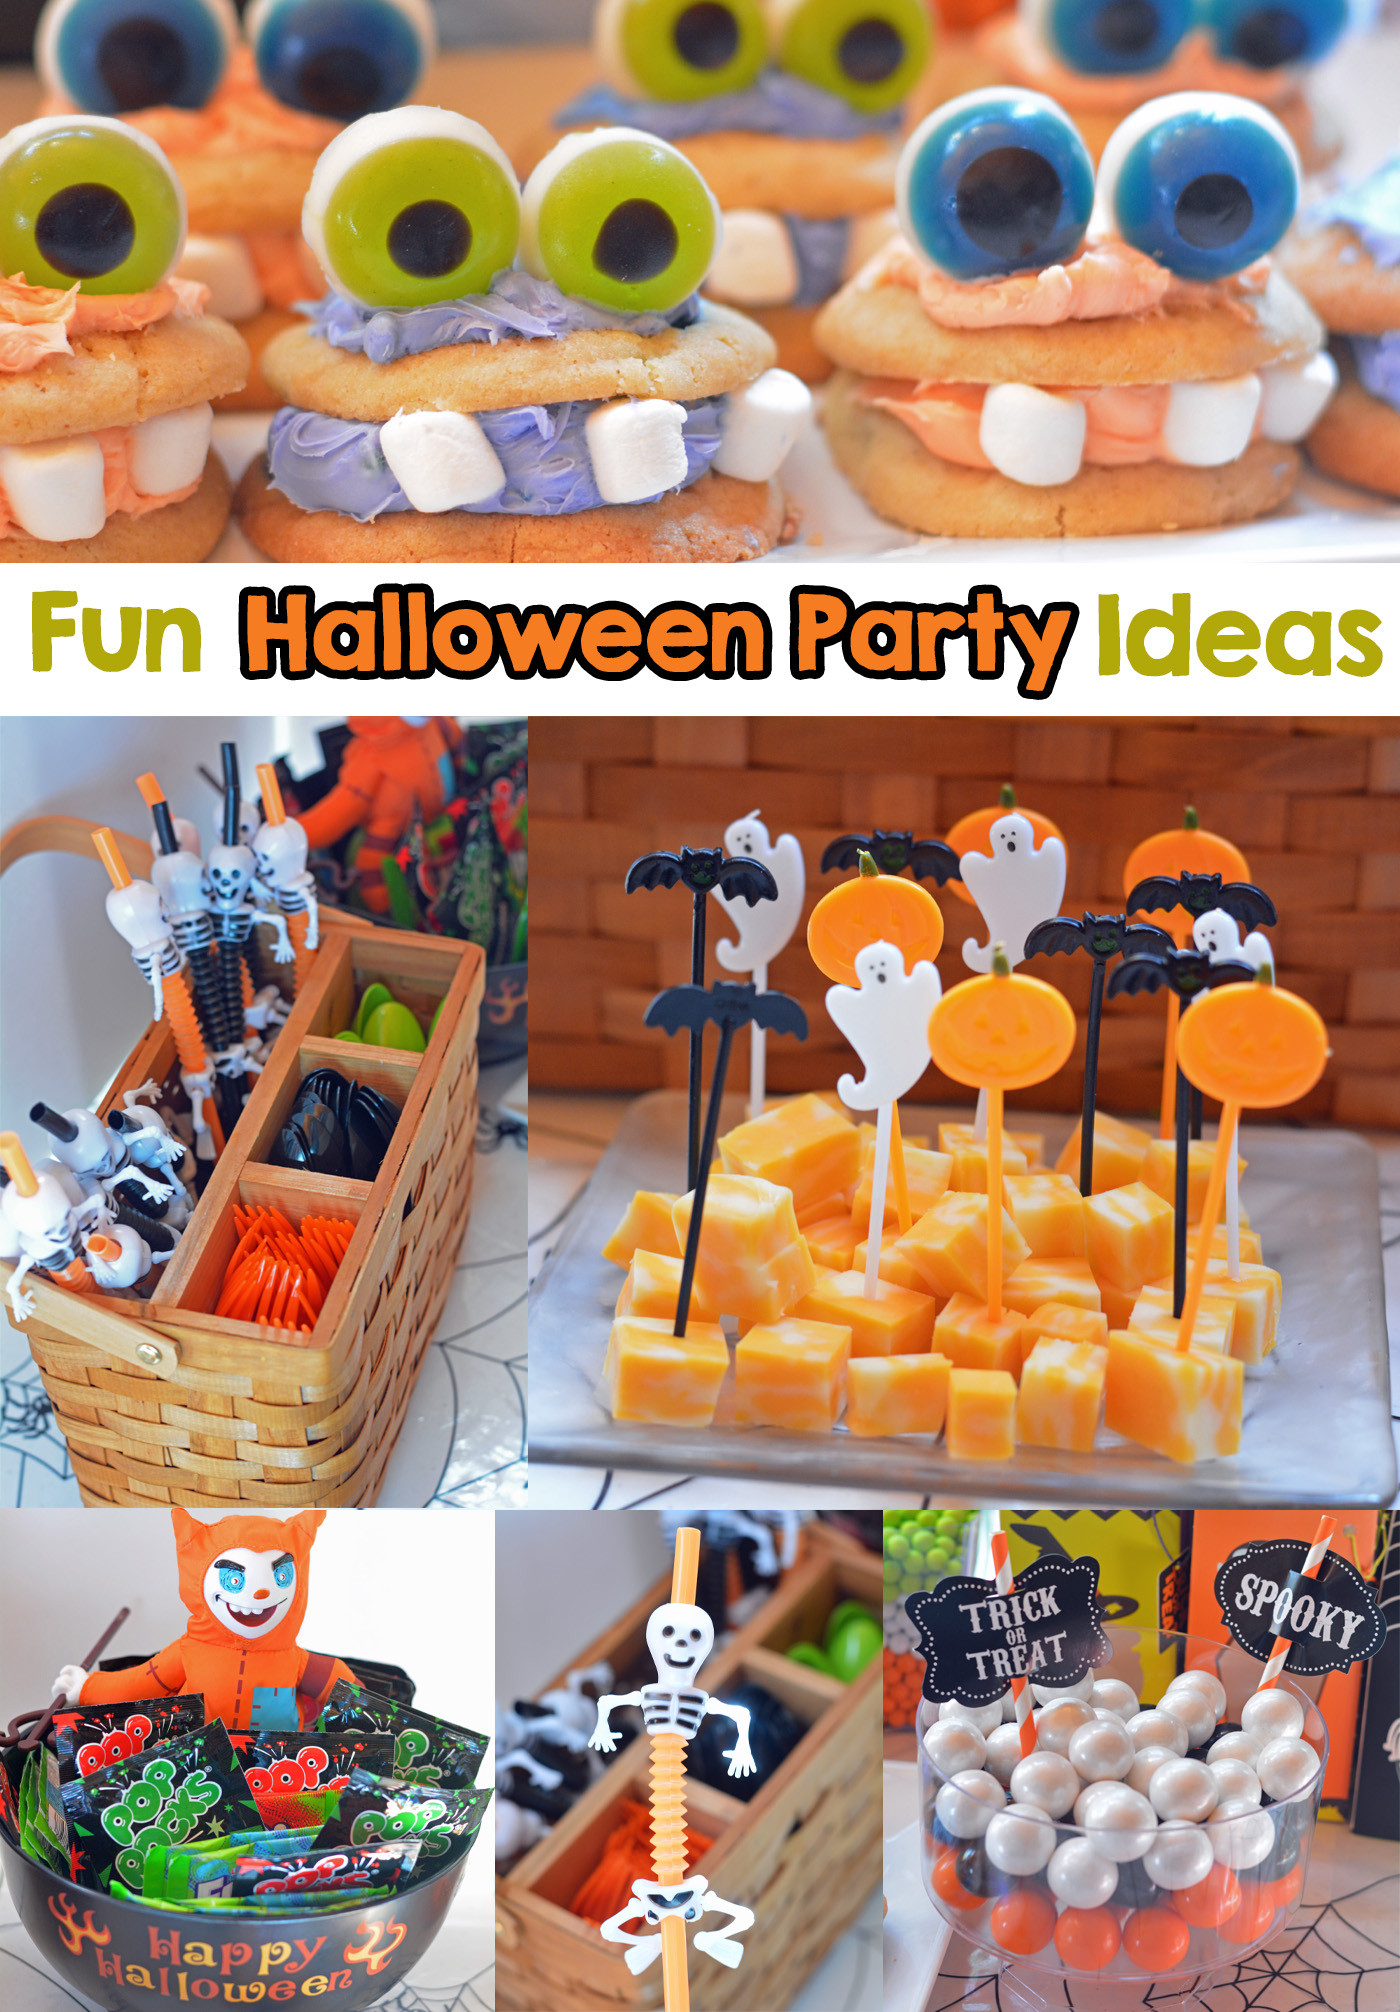 Halloween Themed Kid Party Ideas
 Fun Halloween Party & Costume Ideas Mommy s Fabulous Finds